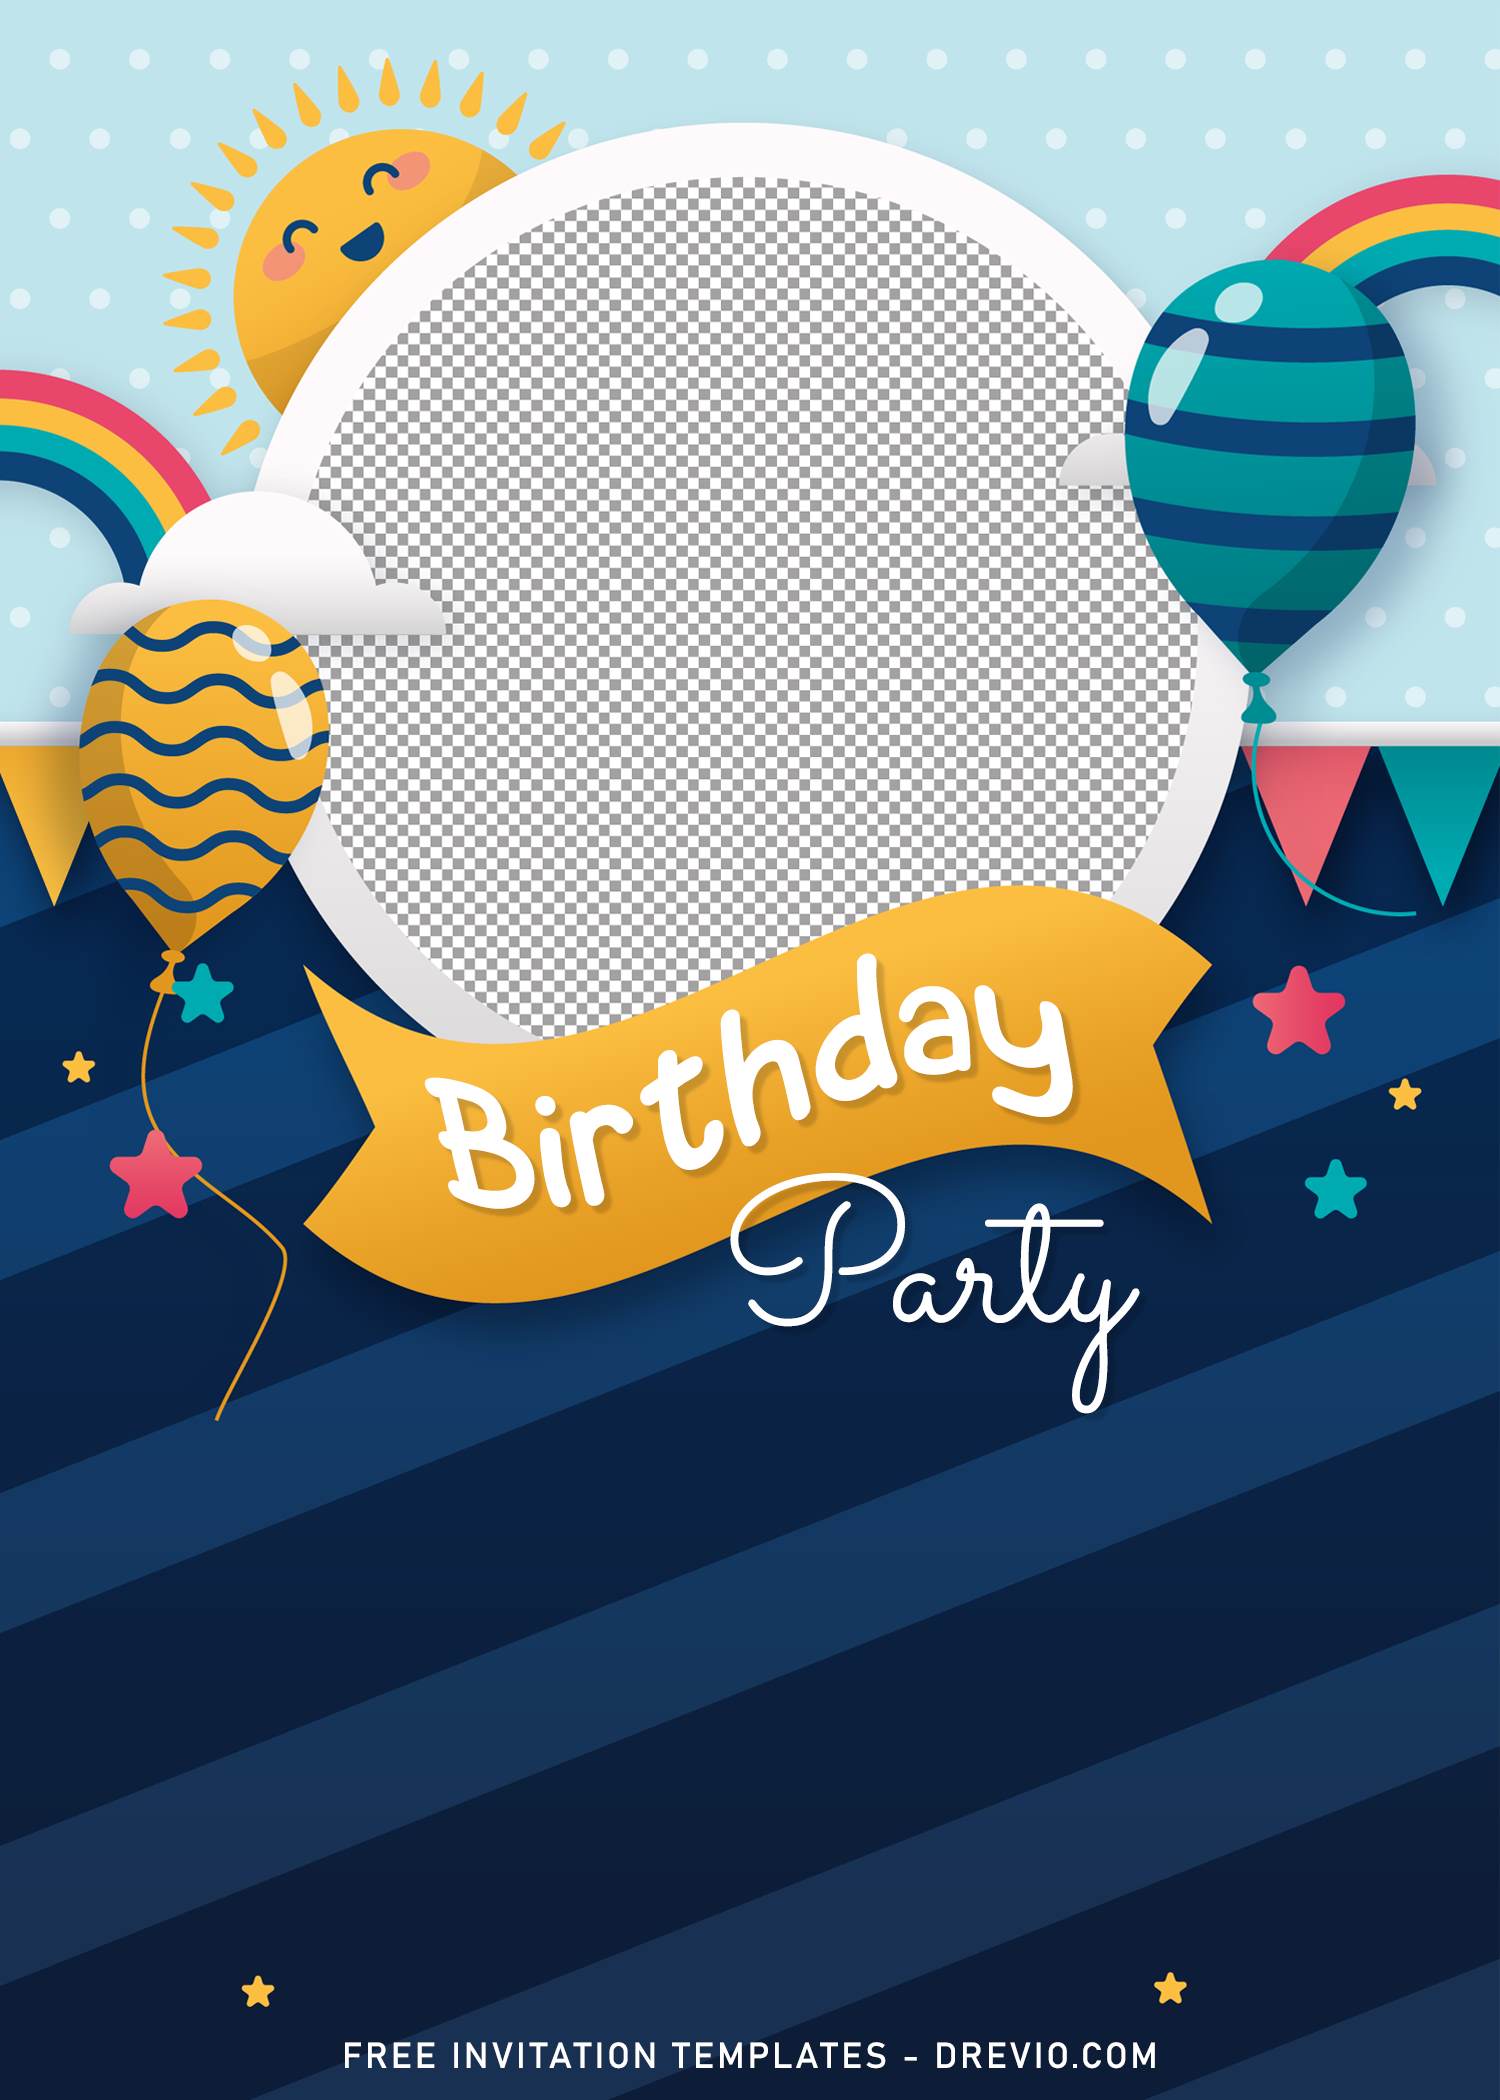 galaxy-birthday-invitation-templates-editable-with-ms-word-download-hundreds-free-printable